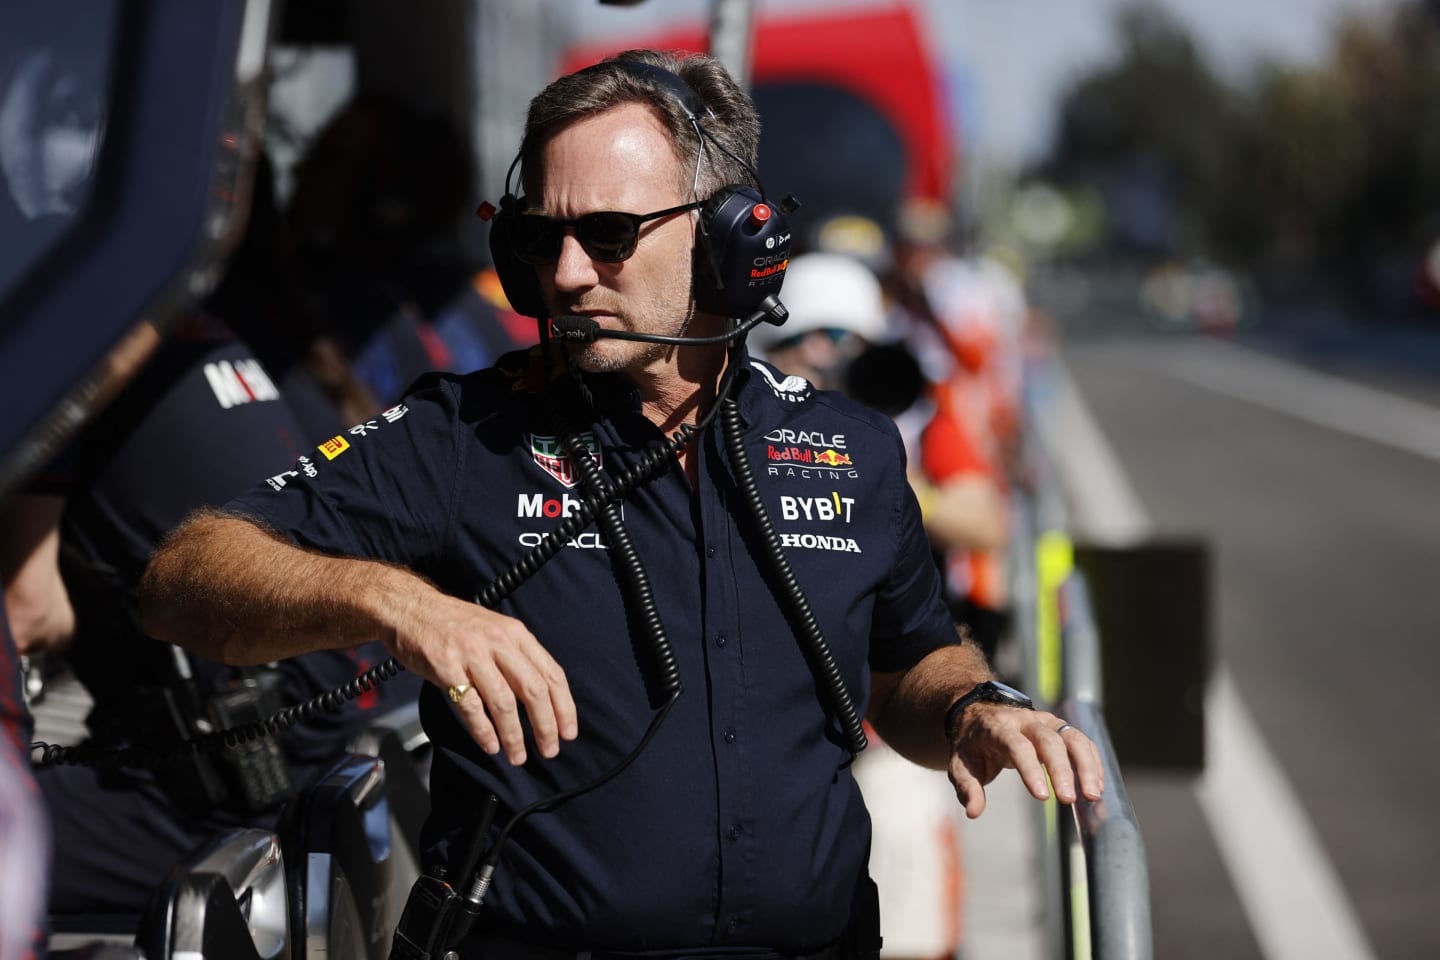 Red Bull Racing's British team principal Christian Horner watches the qualifying session session